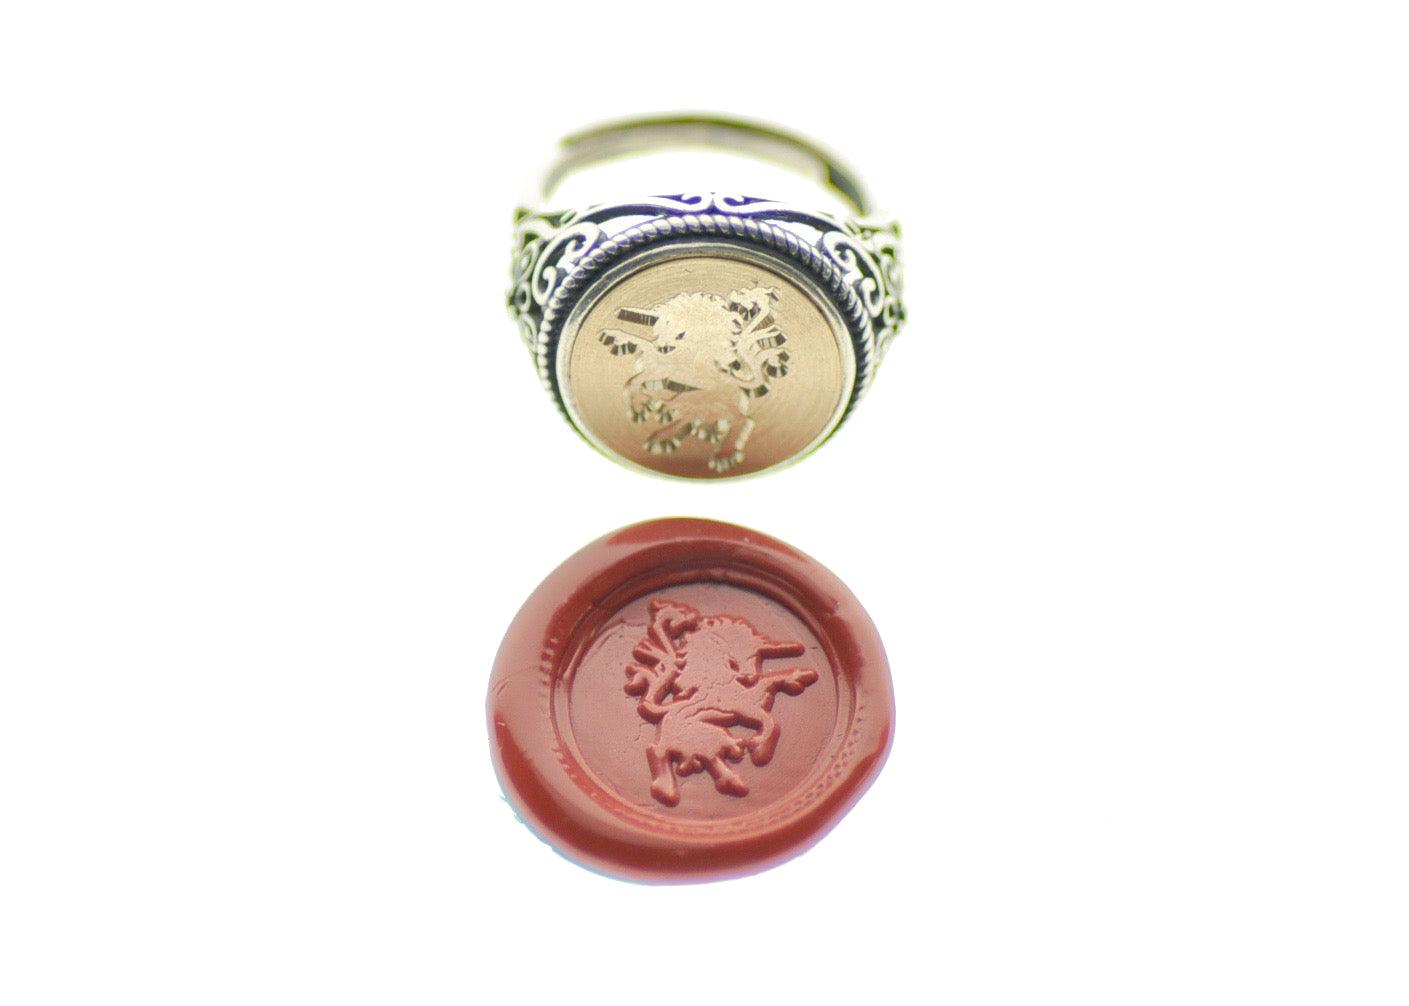 Unicorn Signet Ring - Backtozero B20 - 14f, 14mm, 14mm ring, accessory, fancy, her, jewelry, Mythical Creatures, ring, signet ring, size 10, size 5, size 6, size 7, size 8, size 9, unicorn, wax seal, wax seal stamp